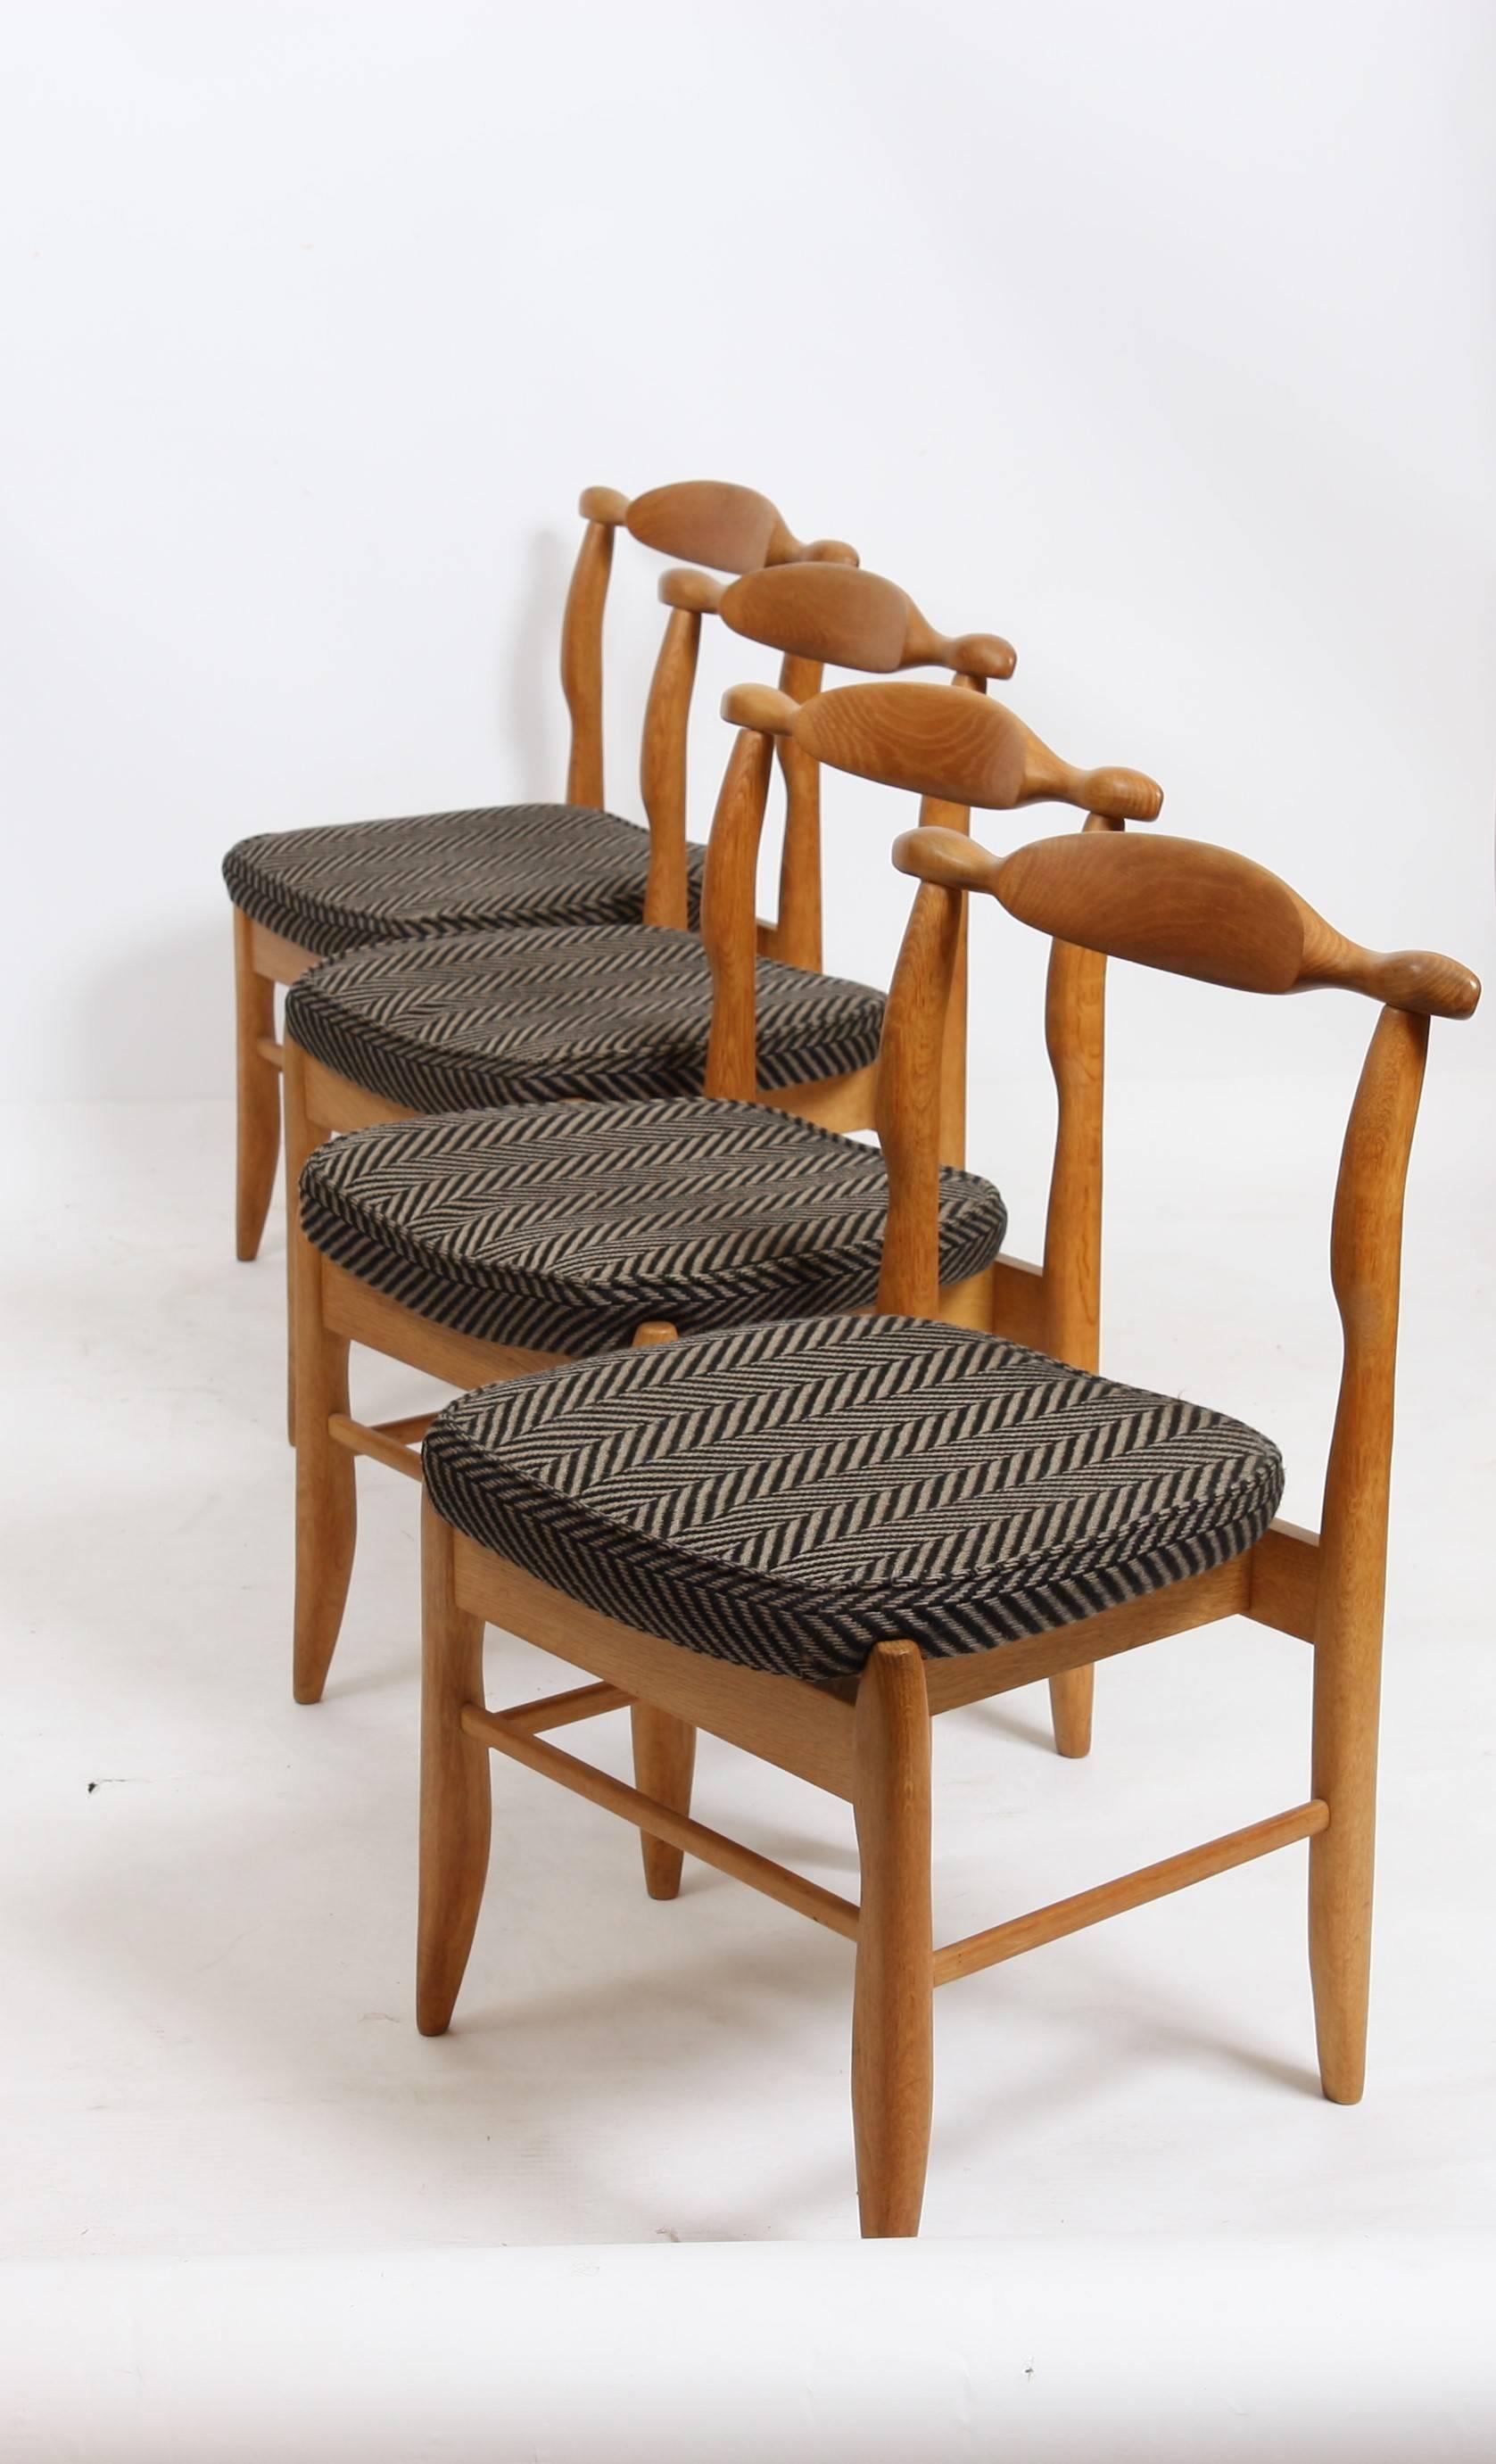 Set of four chairs and two upholstered armchairs, accompanied by a table with two extensions, decorated with ceramic.
Massive oak.
Provenance: Particular family of the North of France, circa 1965.
Original condition.

Robert Guillerme is a